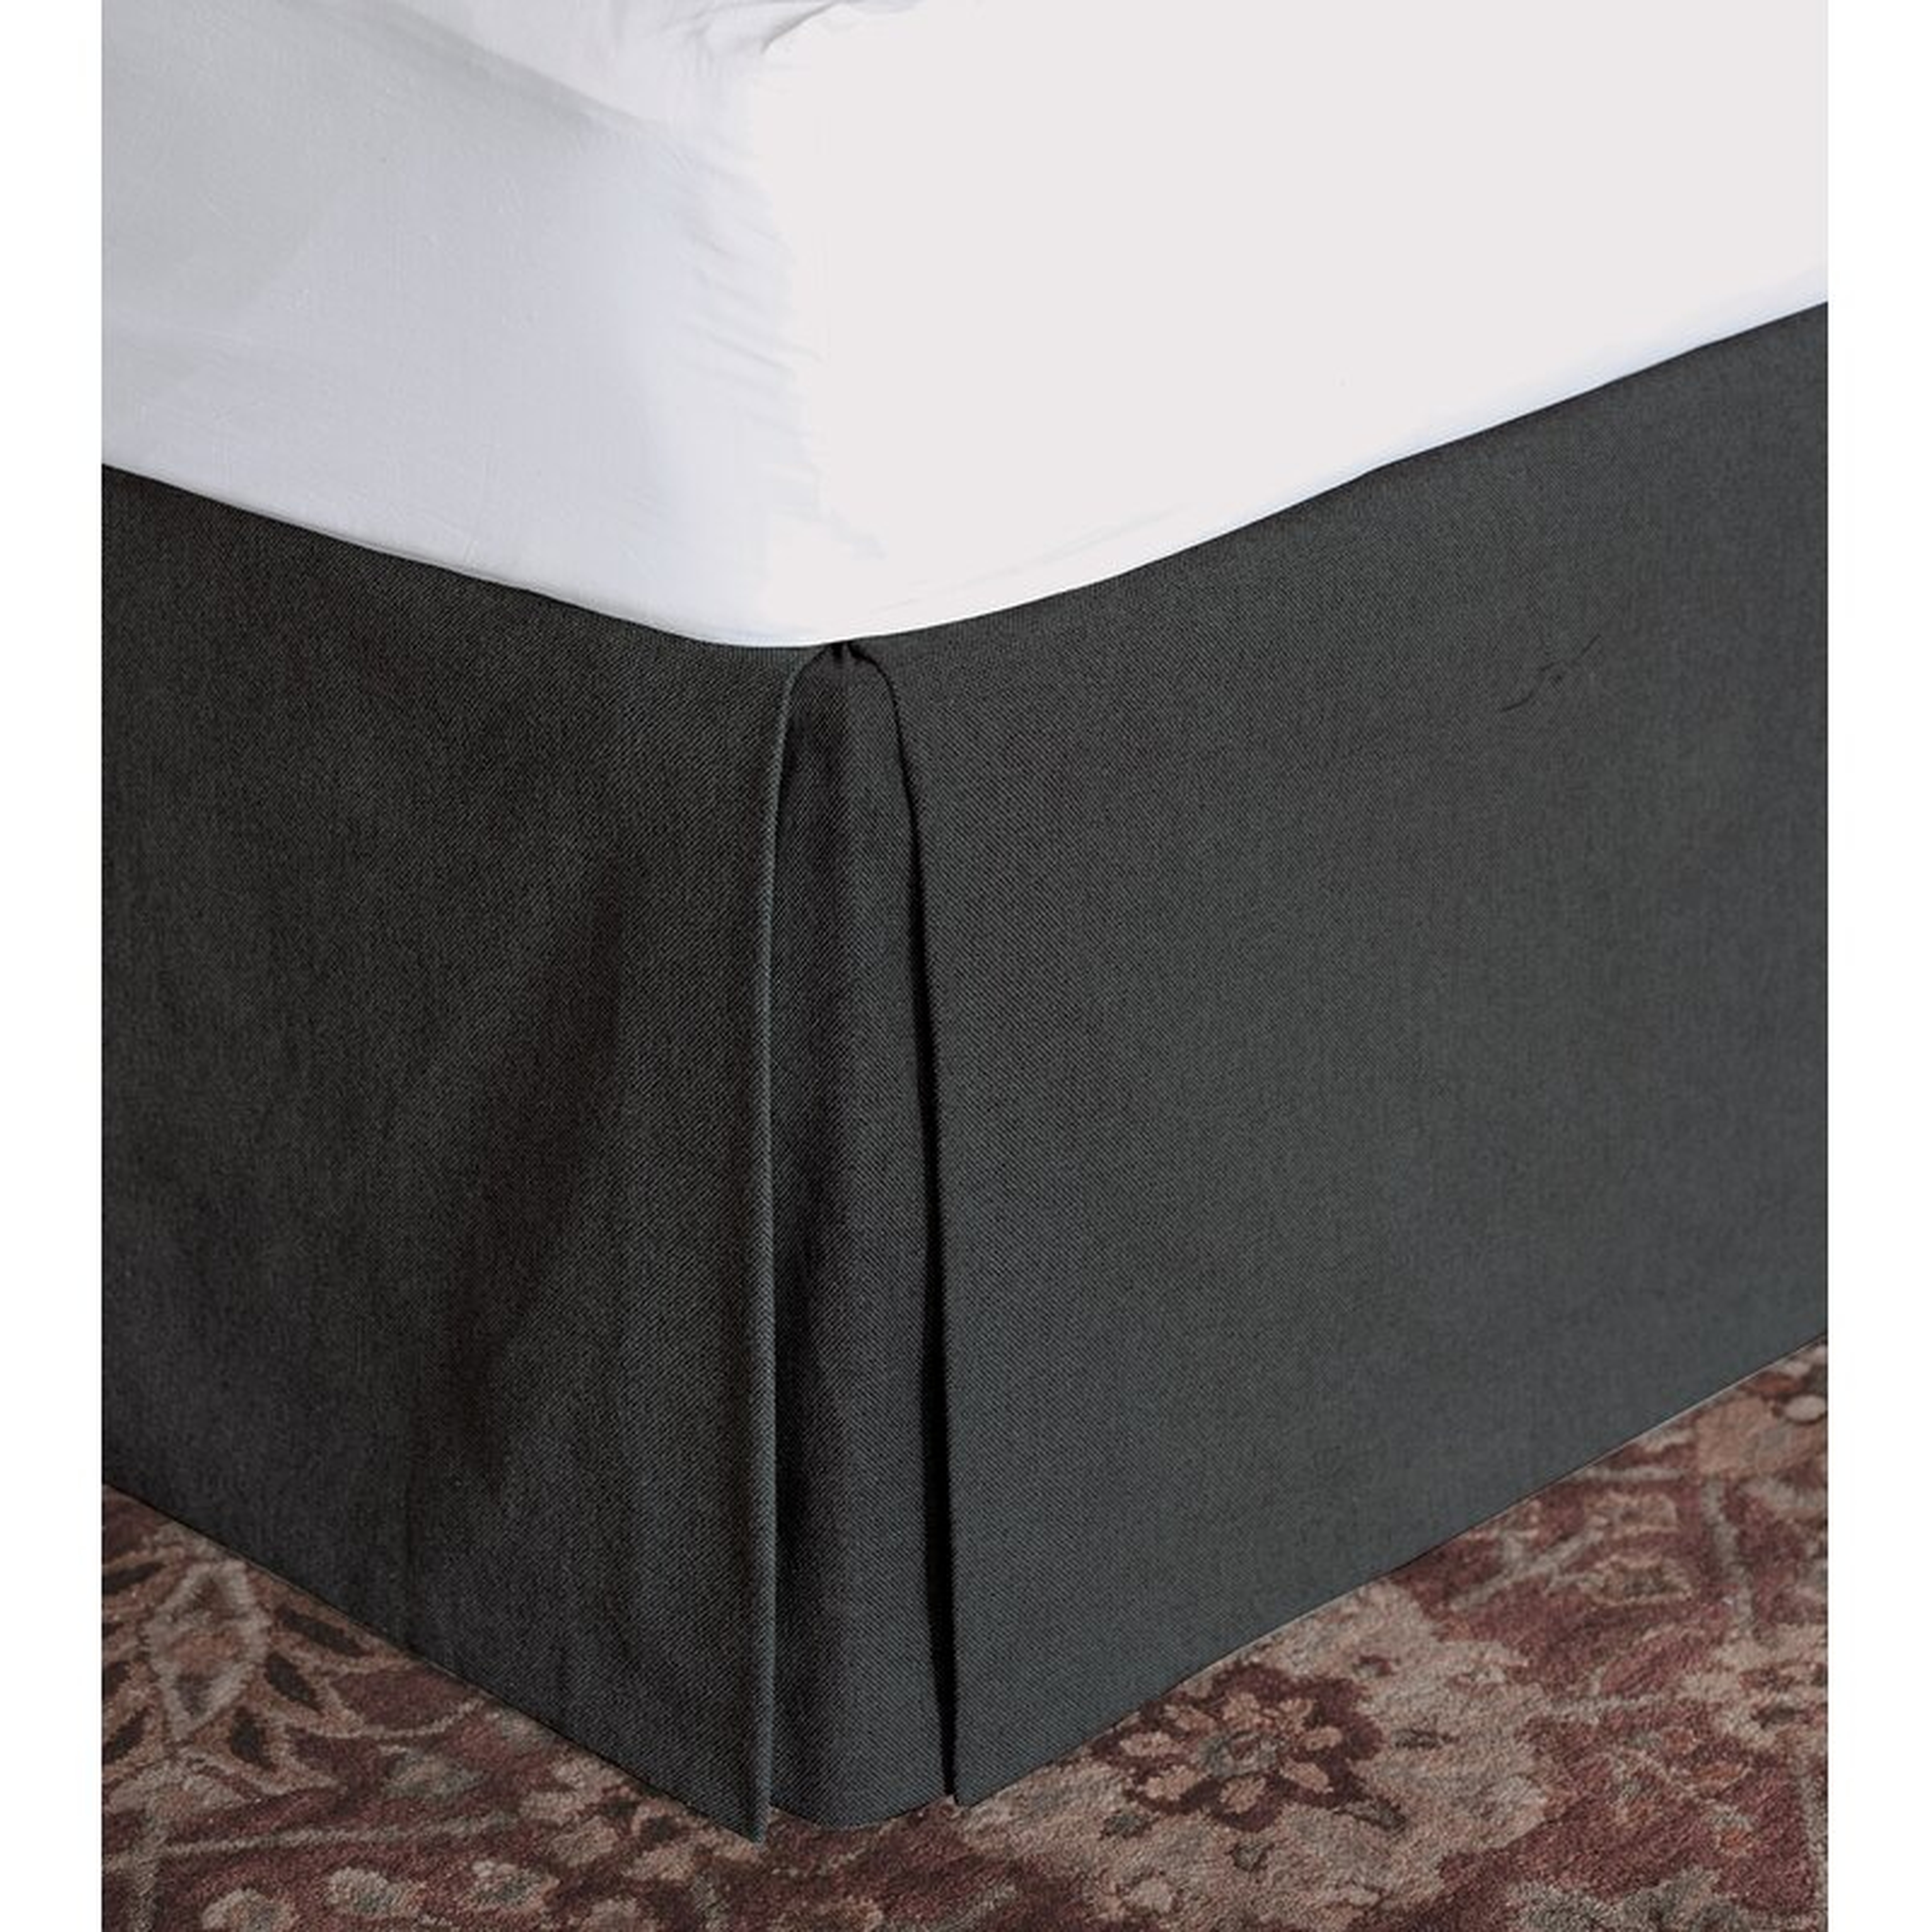 Eastern Accents Jackson 16"" Bed Skirt - Perigold